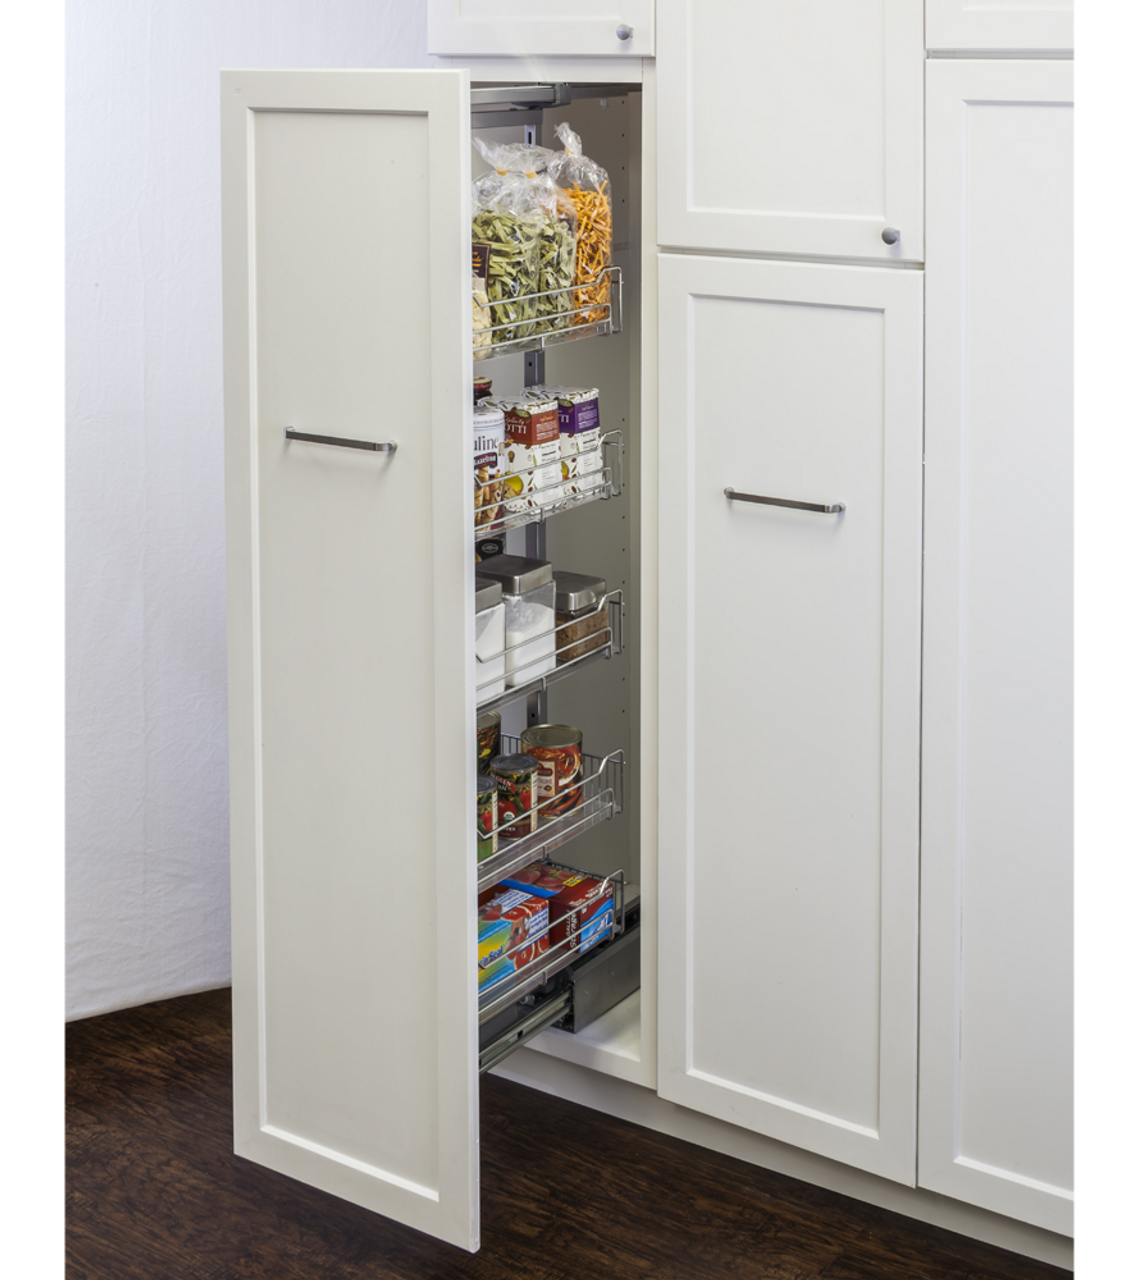 Chrome Wire Soft-close Pantry Pullout